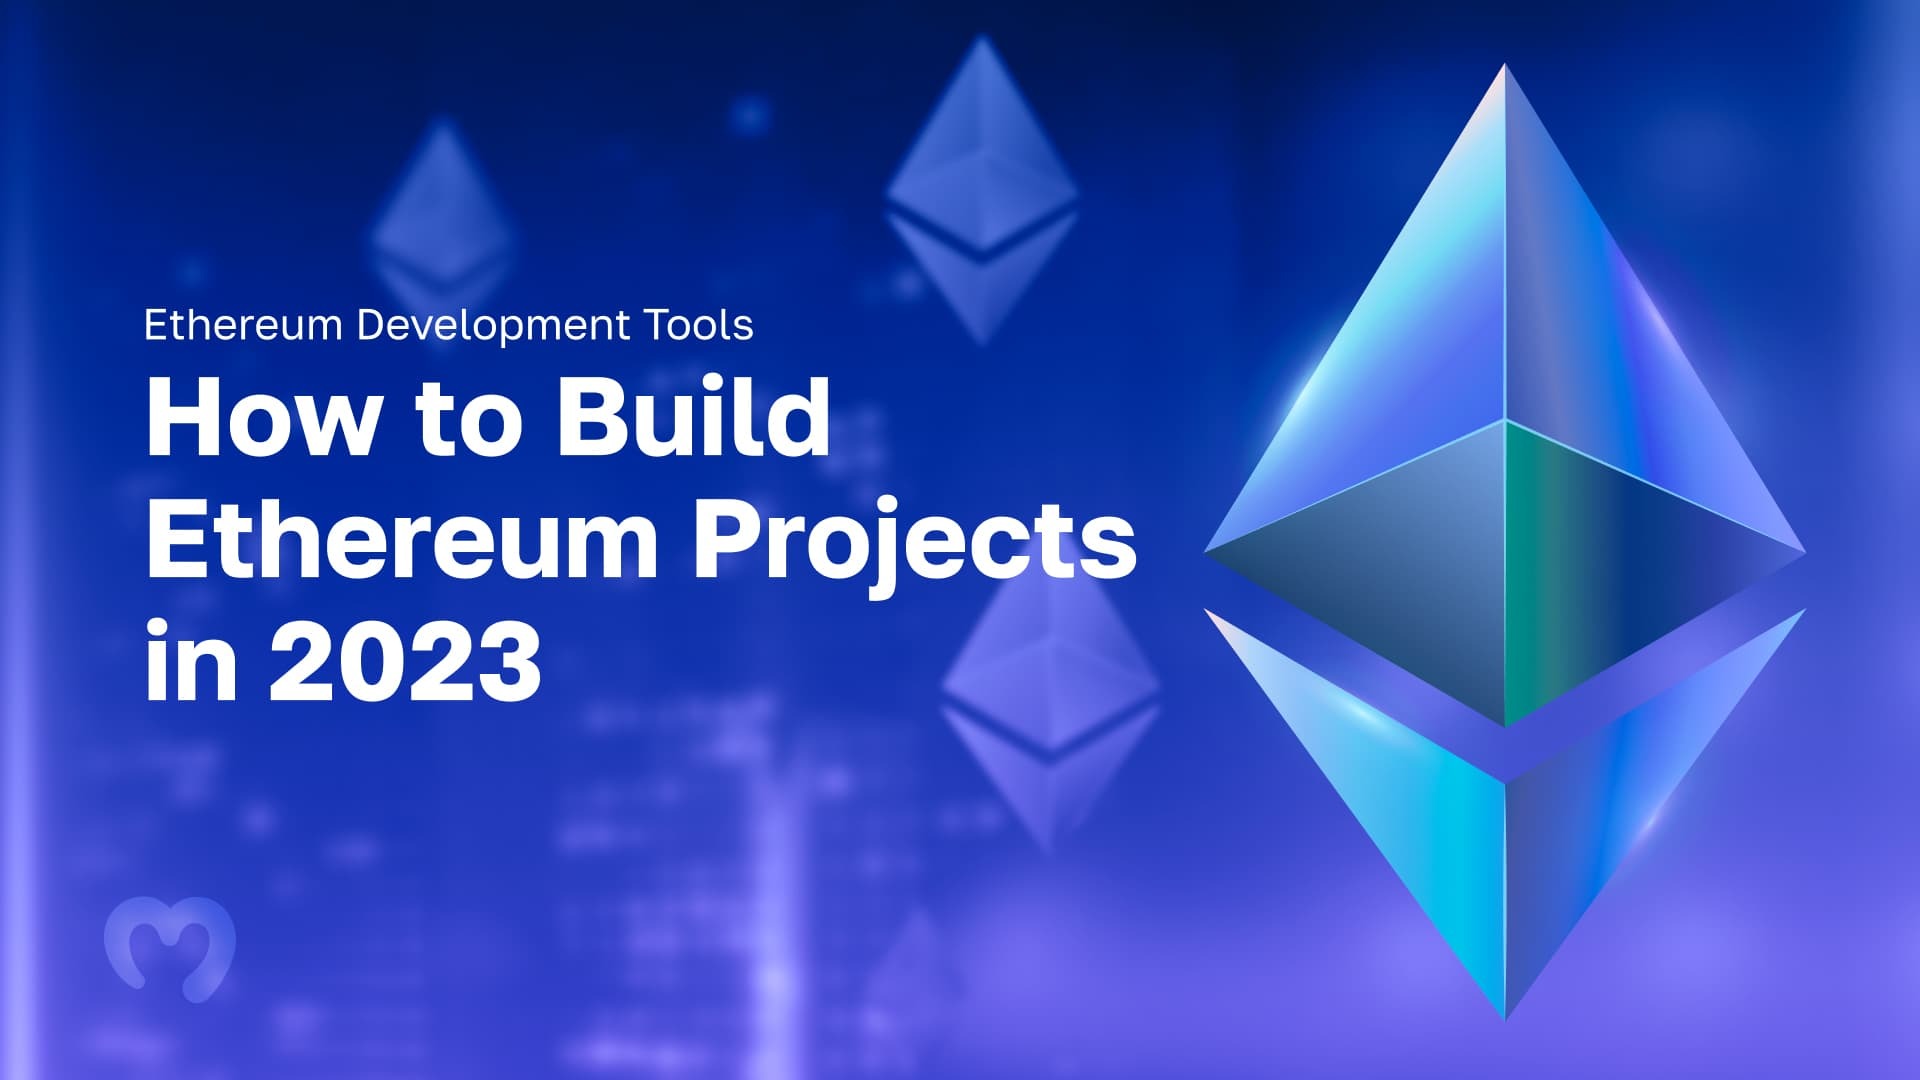 Ethereum Development Tools - How to Build Ethereum Projects in 2023